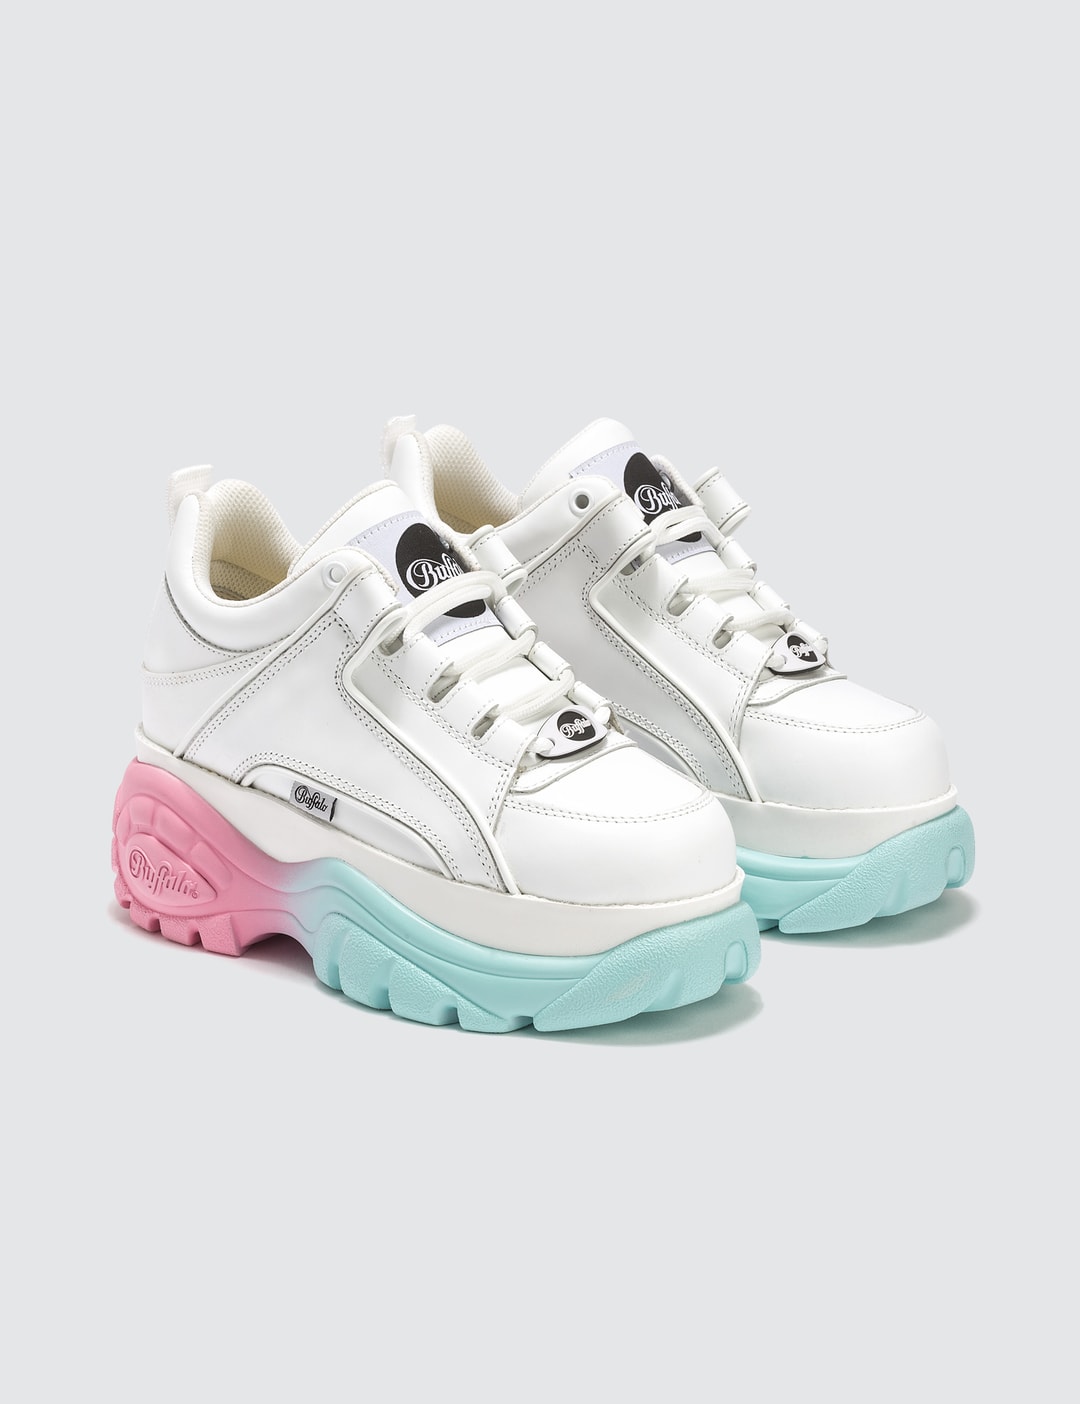 Buffalo London - Low-top Gradient Sole Platform Sneakers HBX - Curated Fashion and Lifestyle by